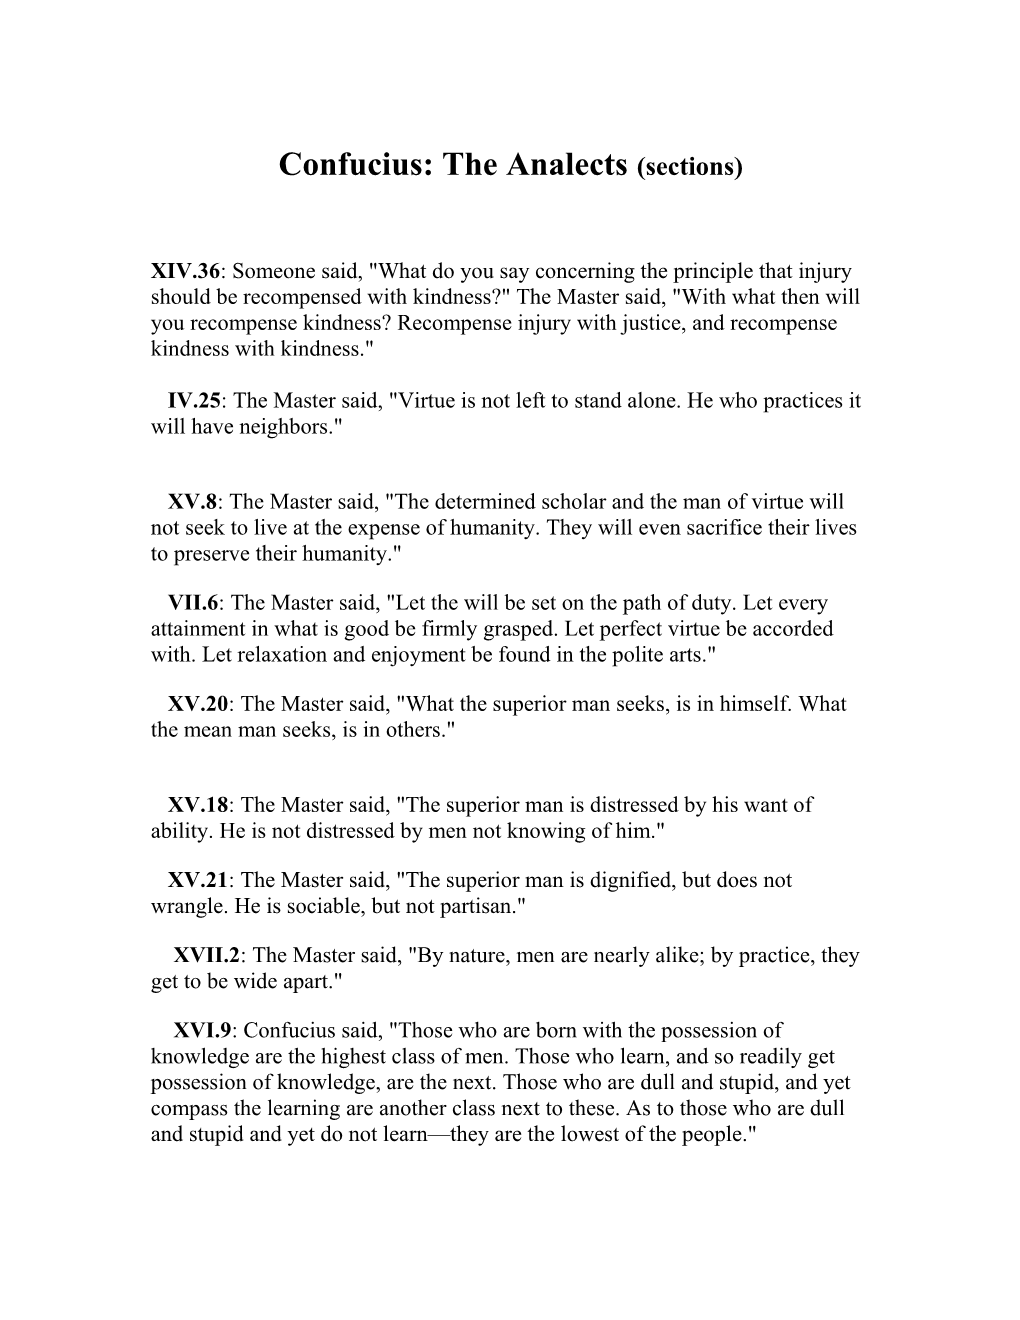 Confucius: the Analects (Sections)